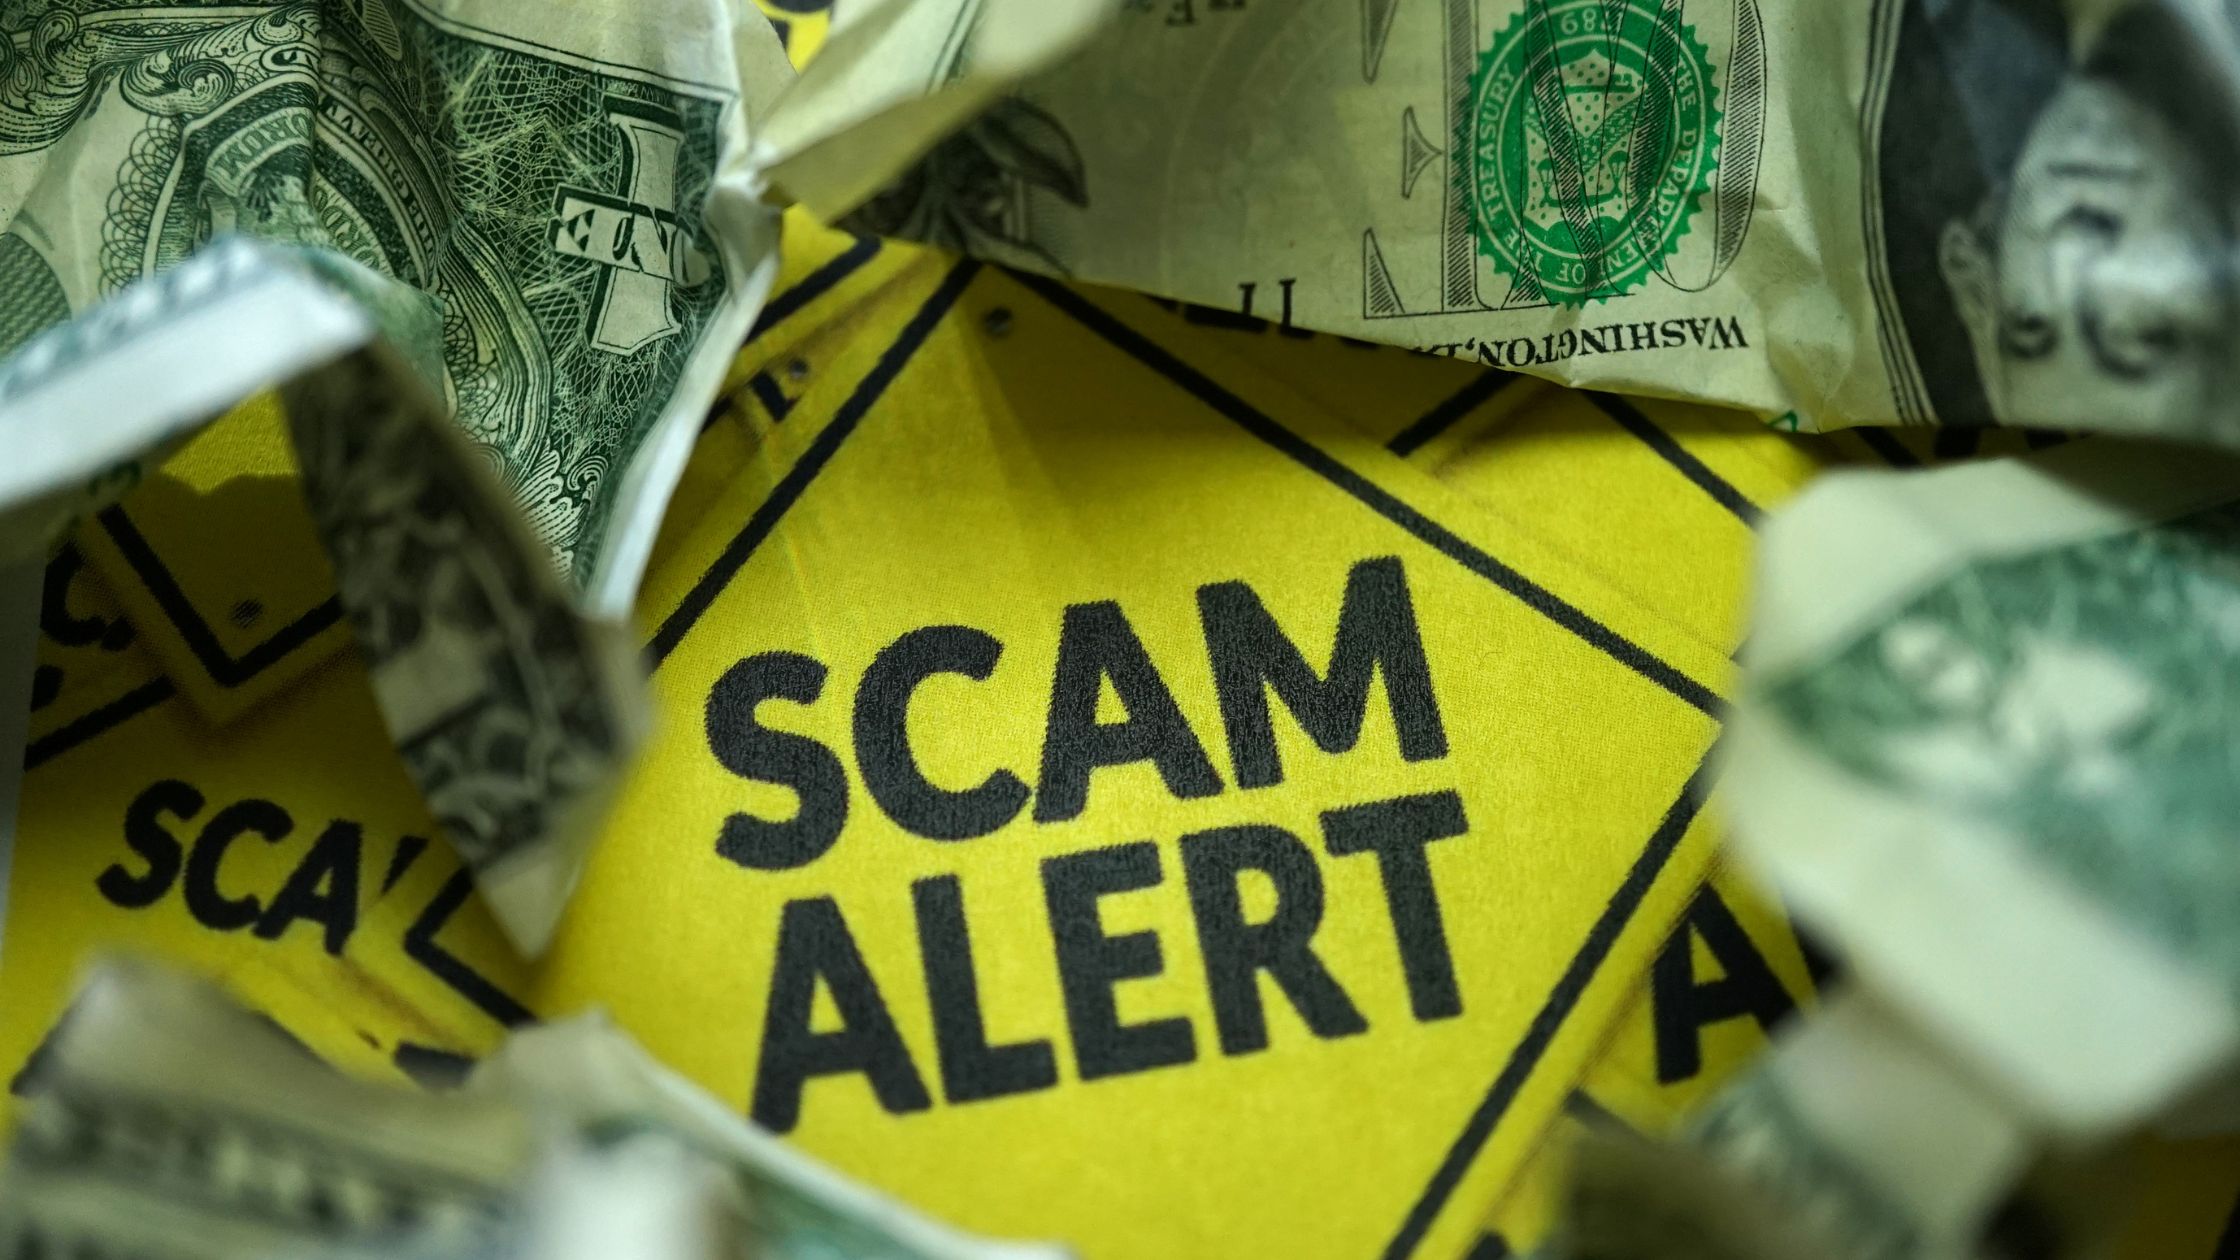 Crumpled dollar bills against a yellow "SCAM ALERT" sign, illustrating the need for vigilance against scams and misinformation regarding Social Security Disability.